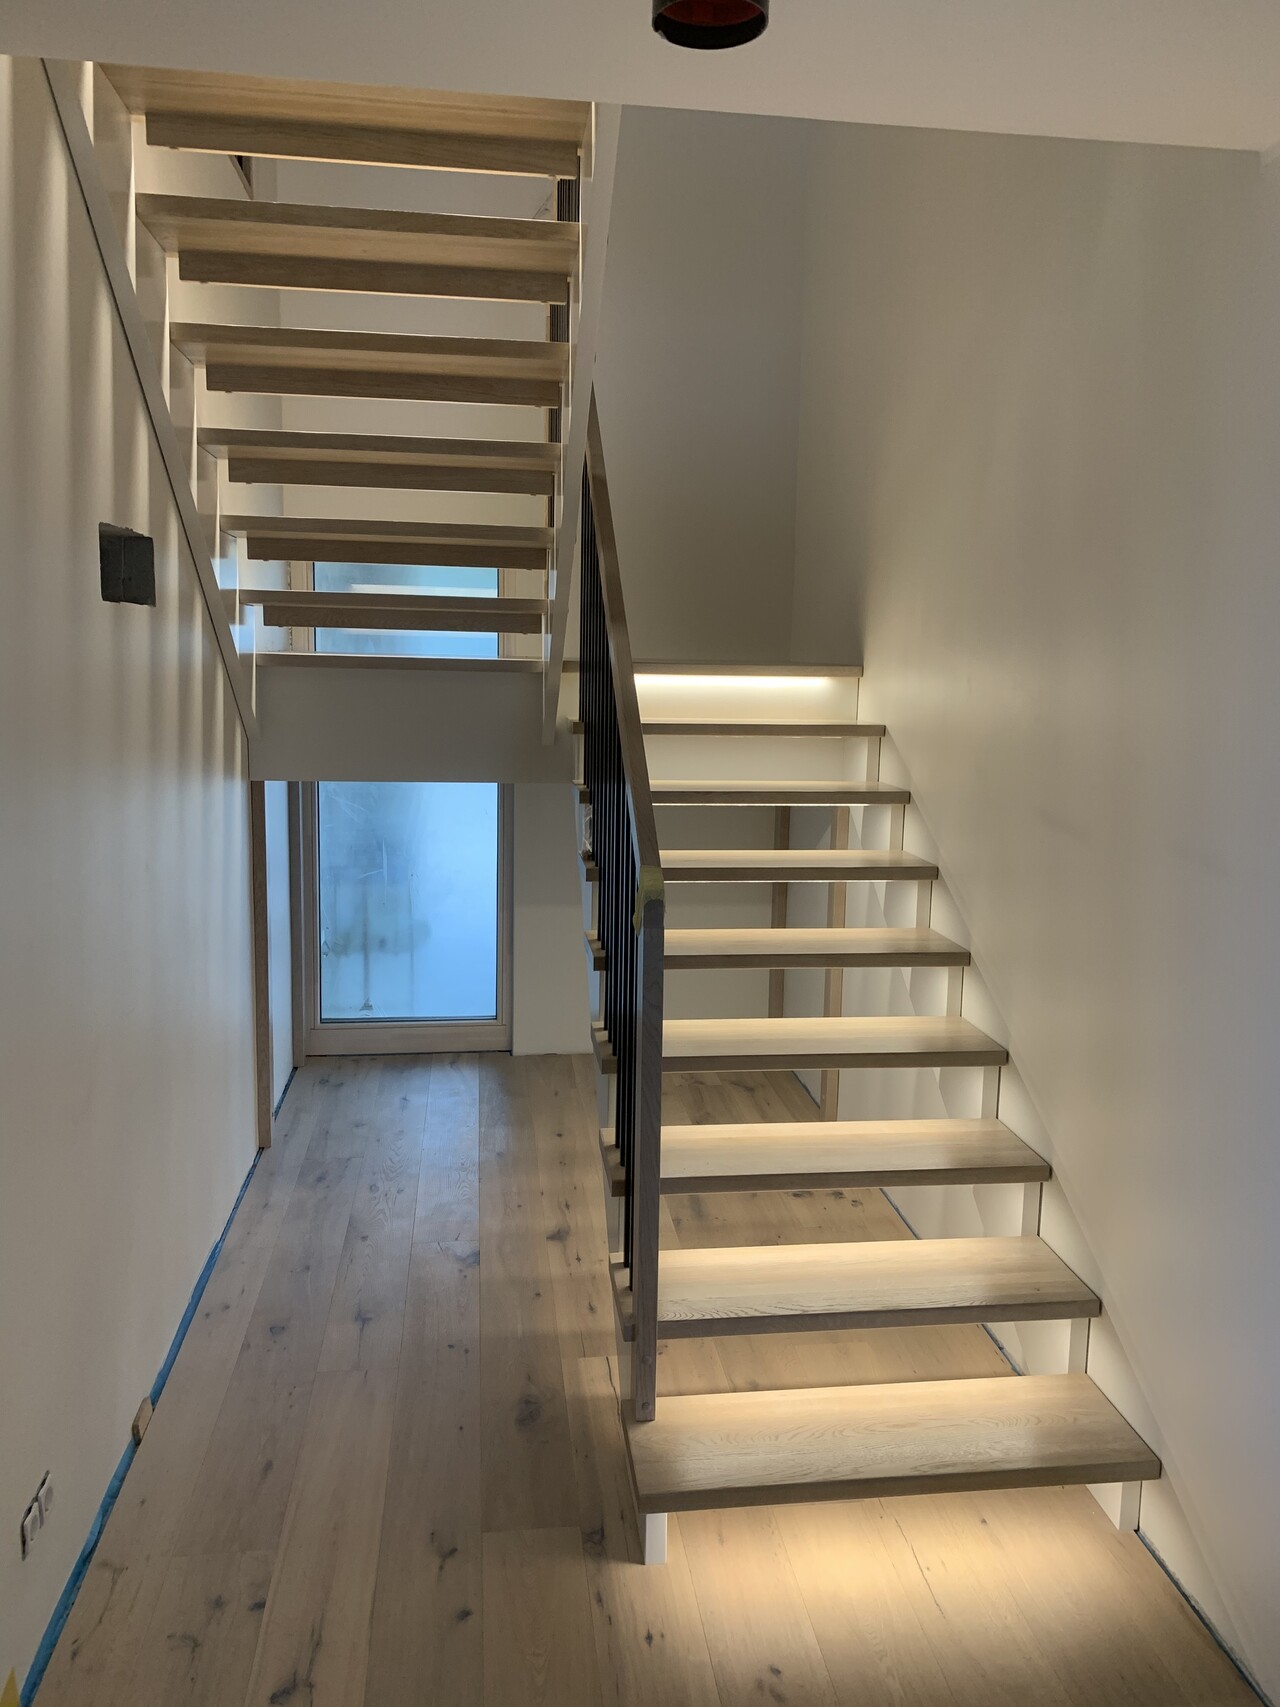 20. U-shaped staircase with a landing, LED lighting